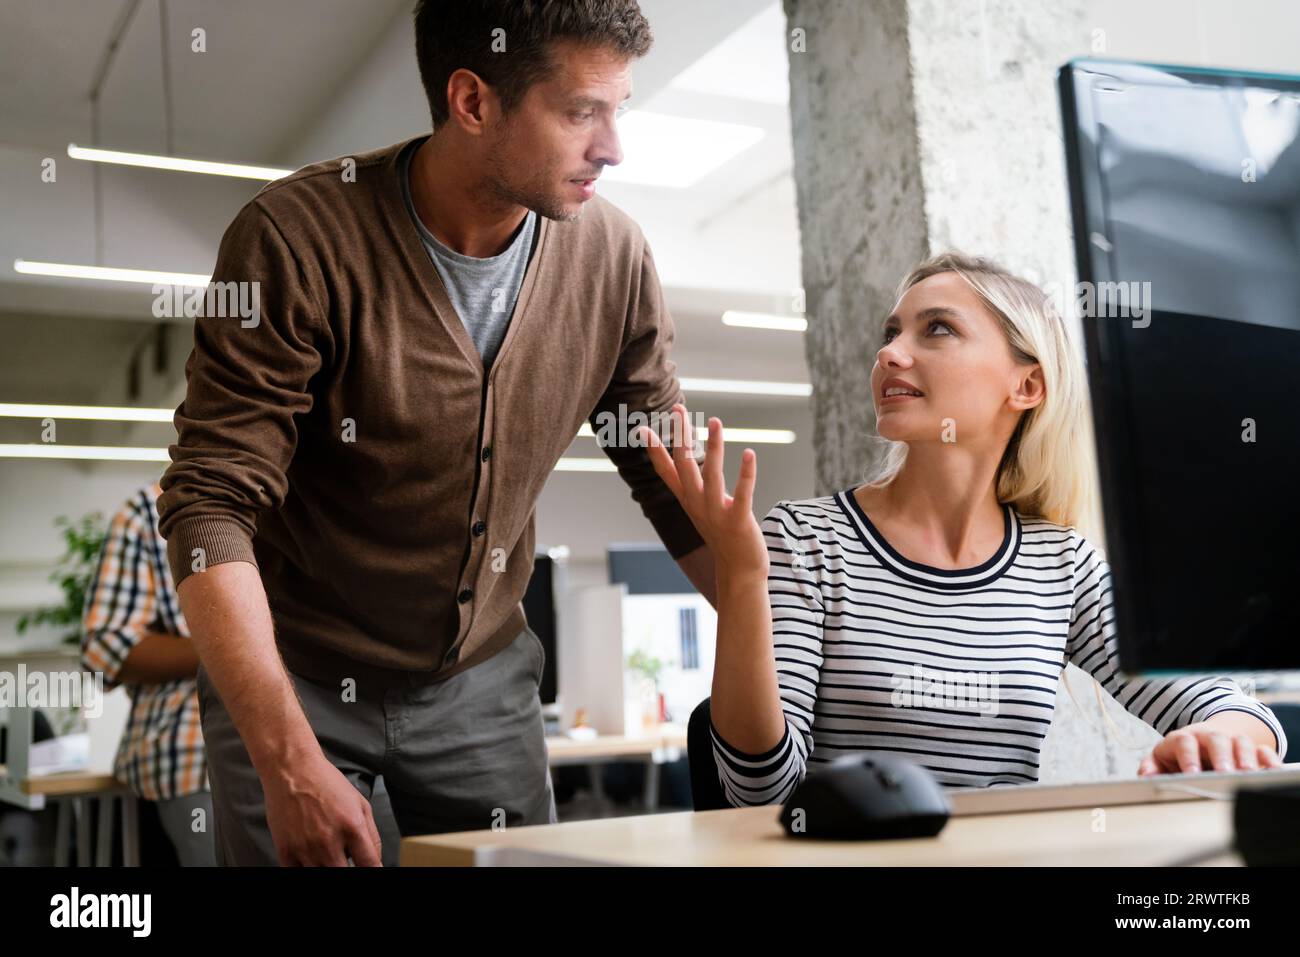 Working together on project. Two young business colleagues working together in startup office Stock Photo